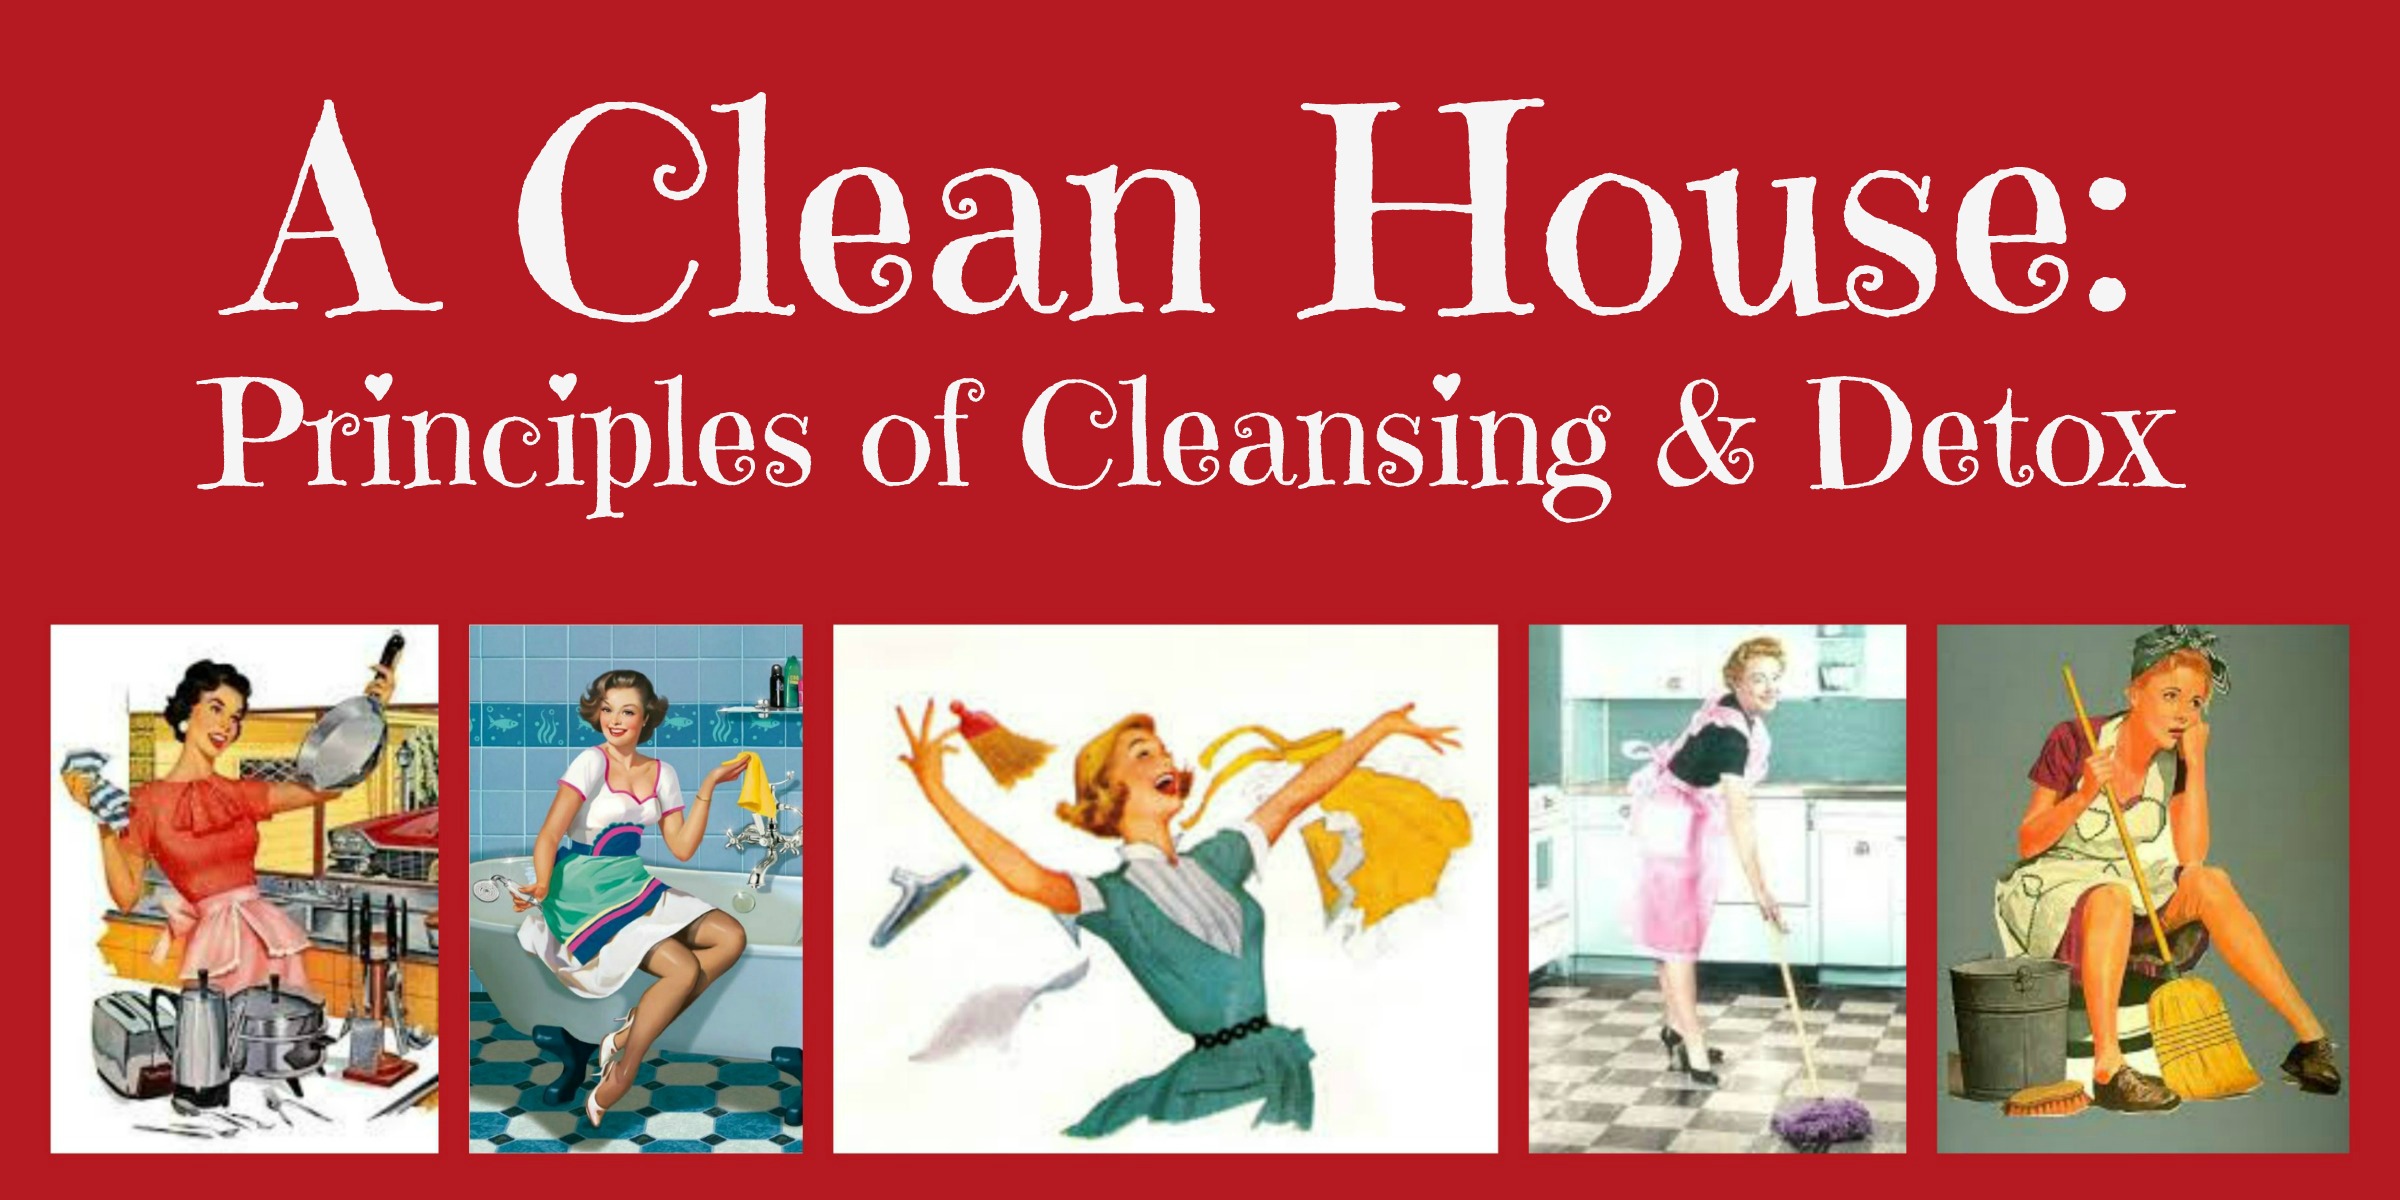 A Clean House Principles of Cleansing & Detox